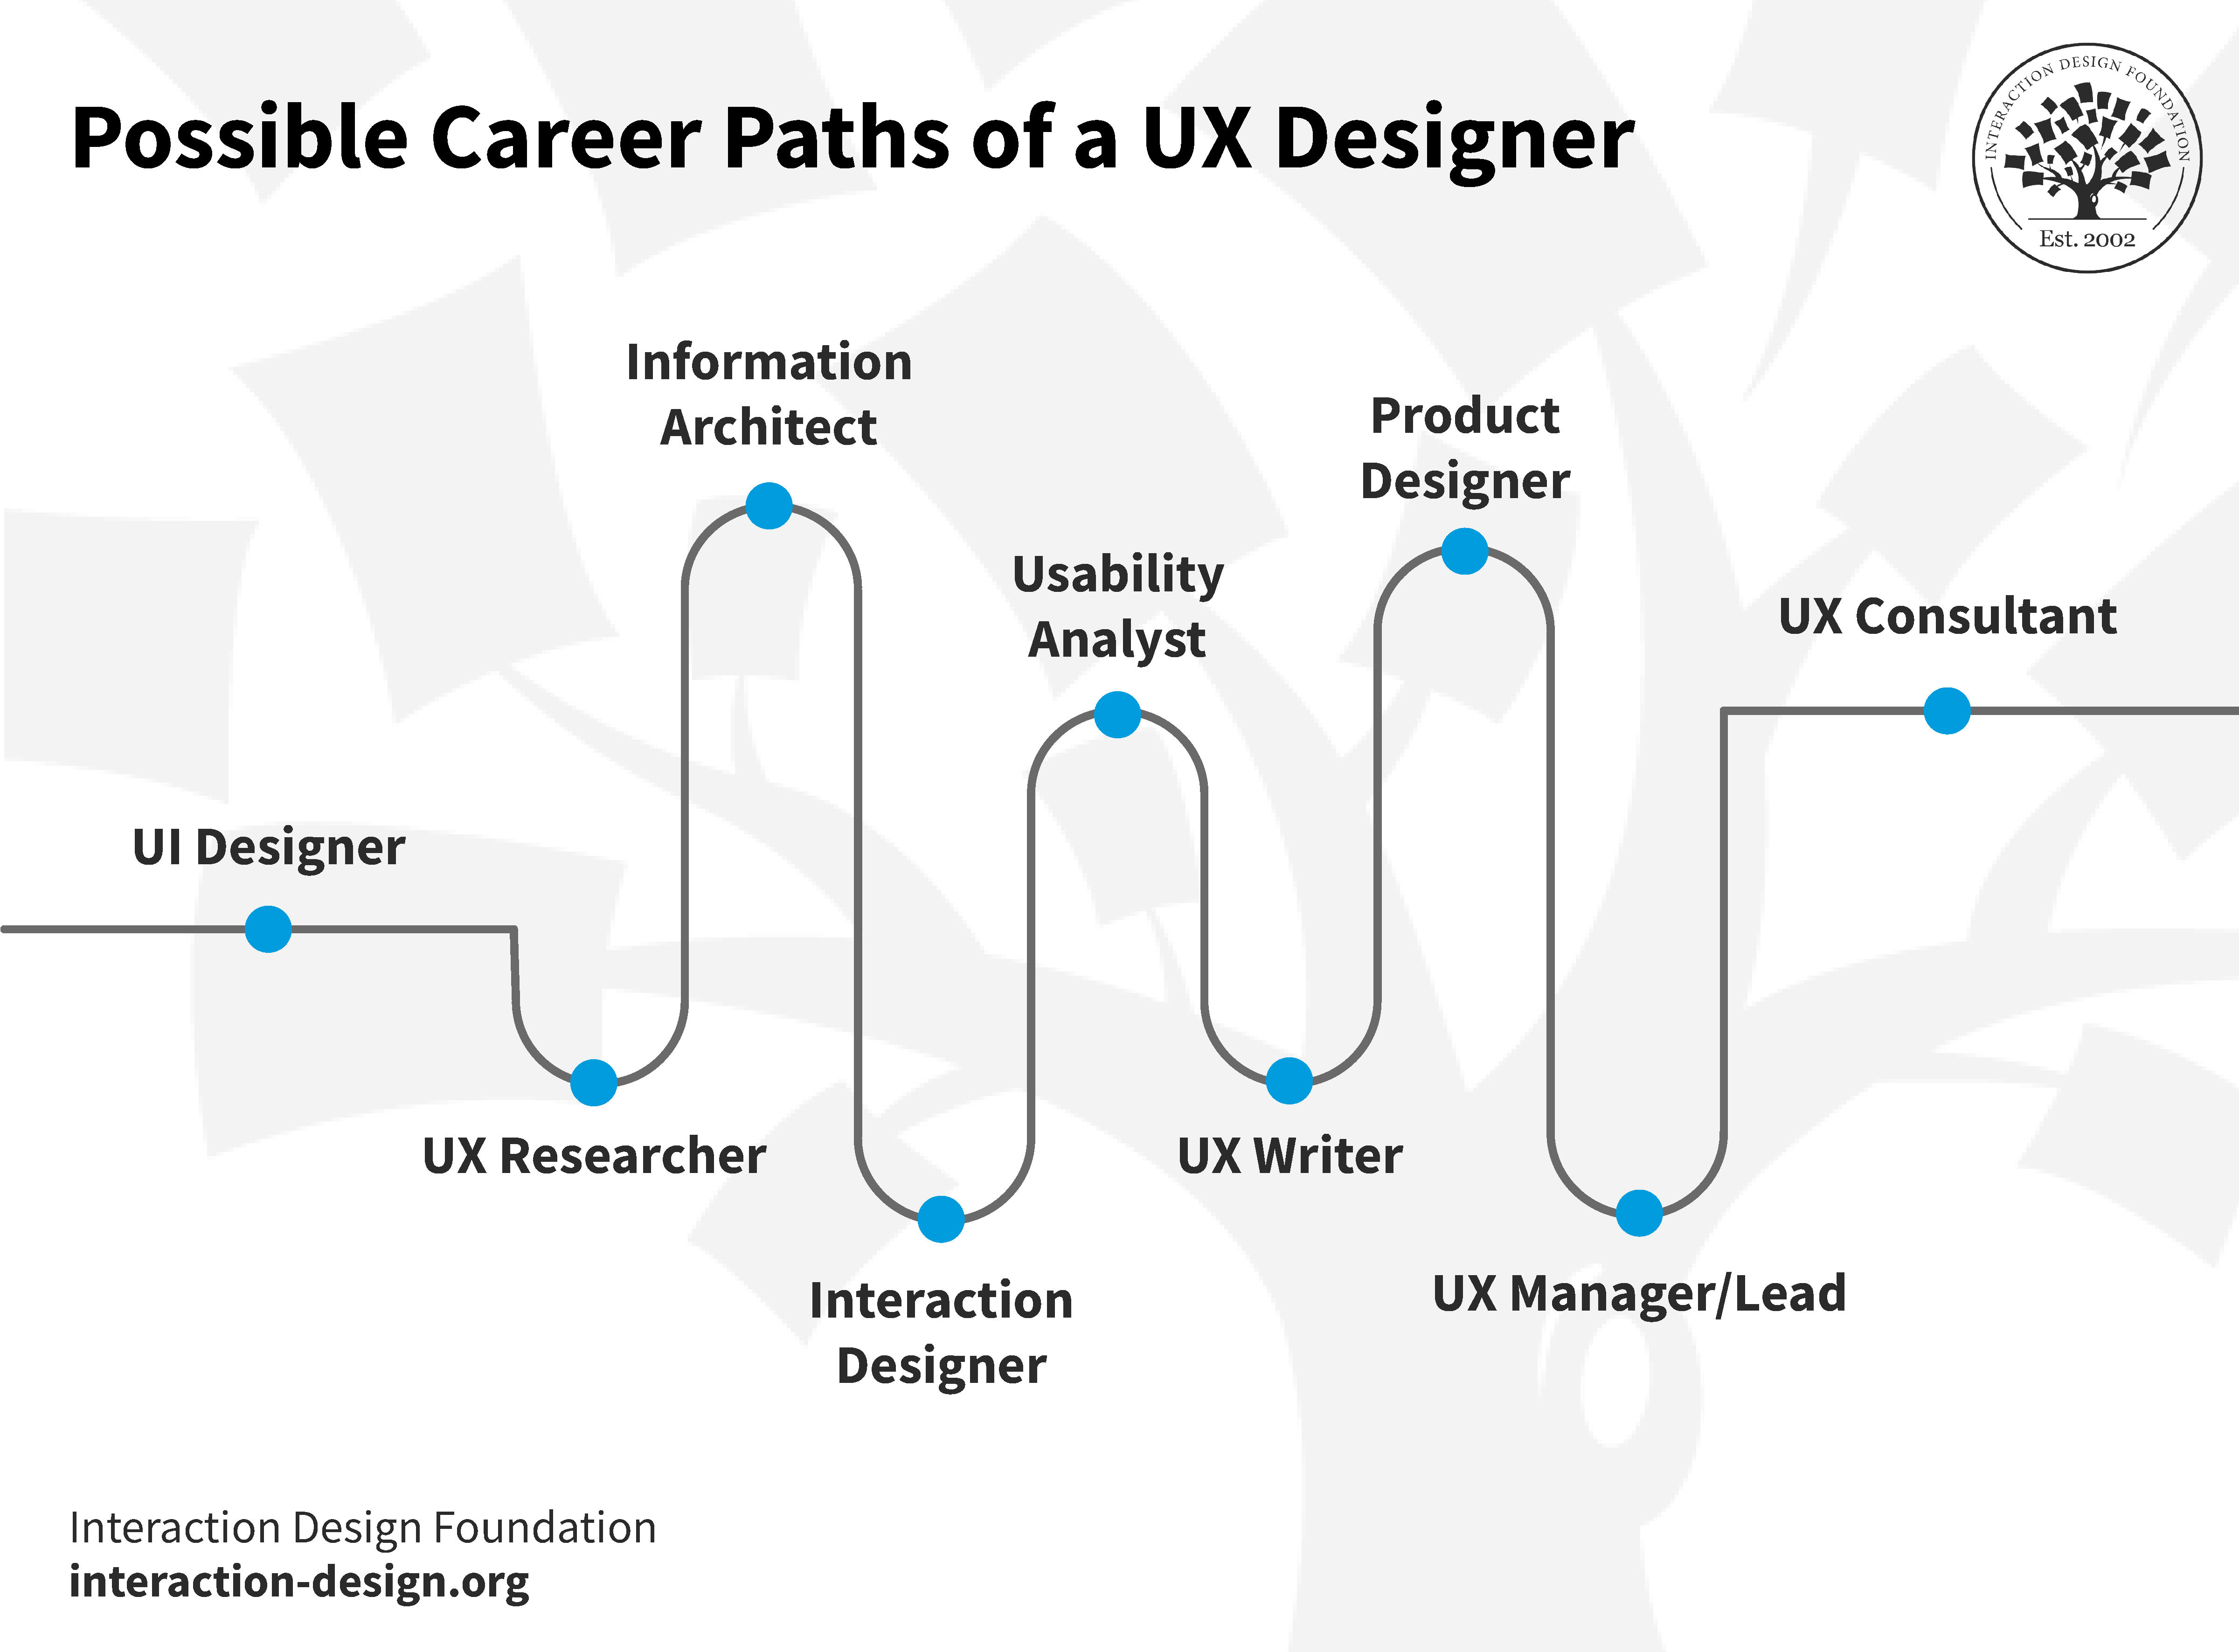 Possible career paths of a UX designer